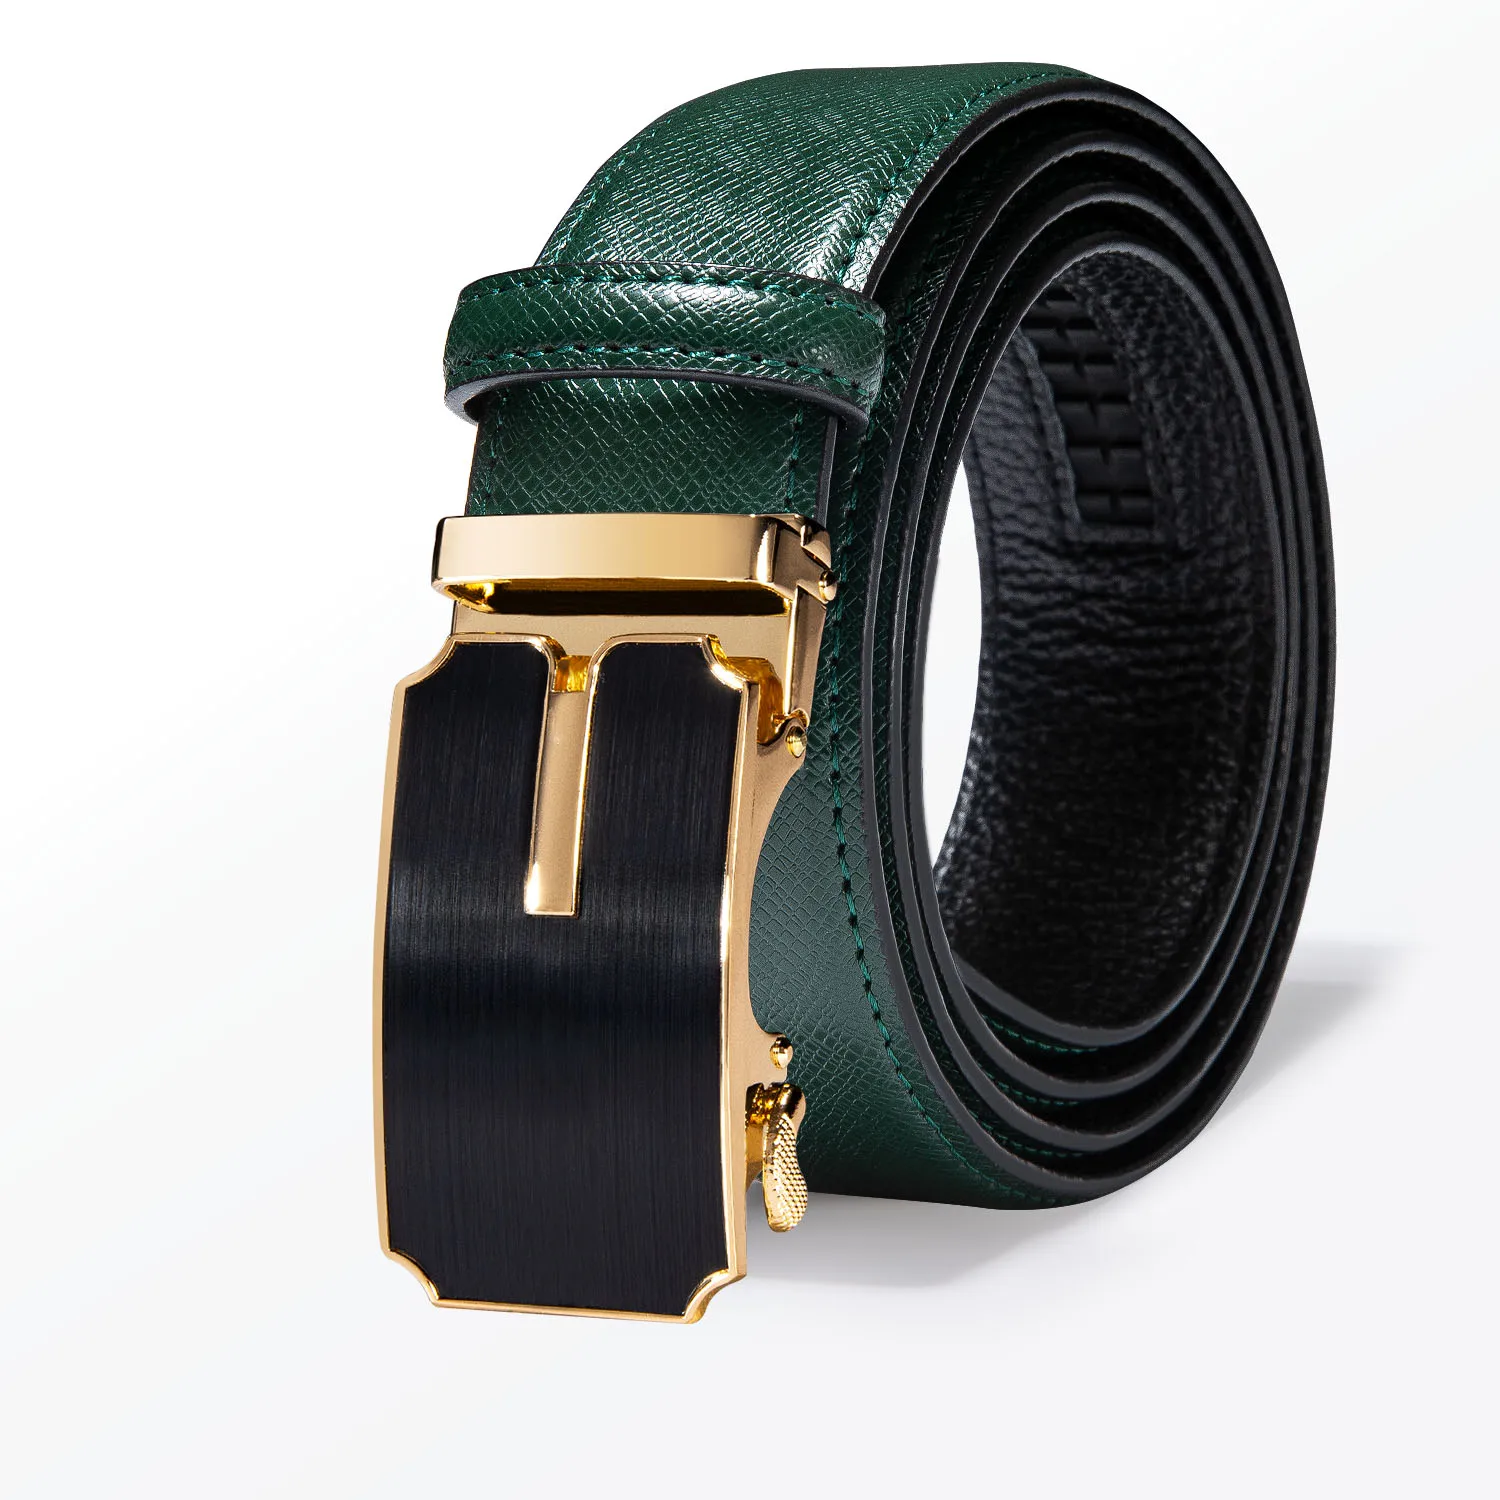 Quality Green Leather Belts For Men Bussiness Casual Belts Metal Automatic Buckle New Fashion Jeans Trousers Pants Waistband